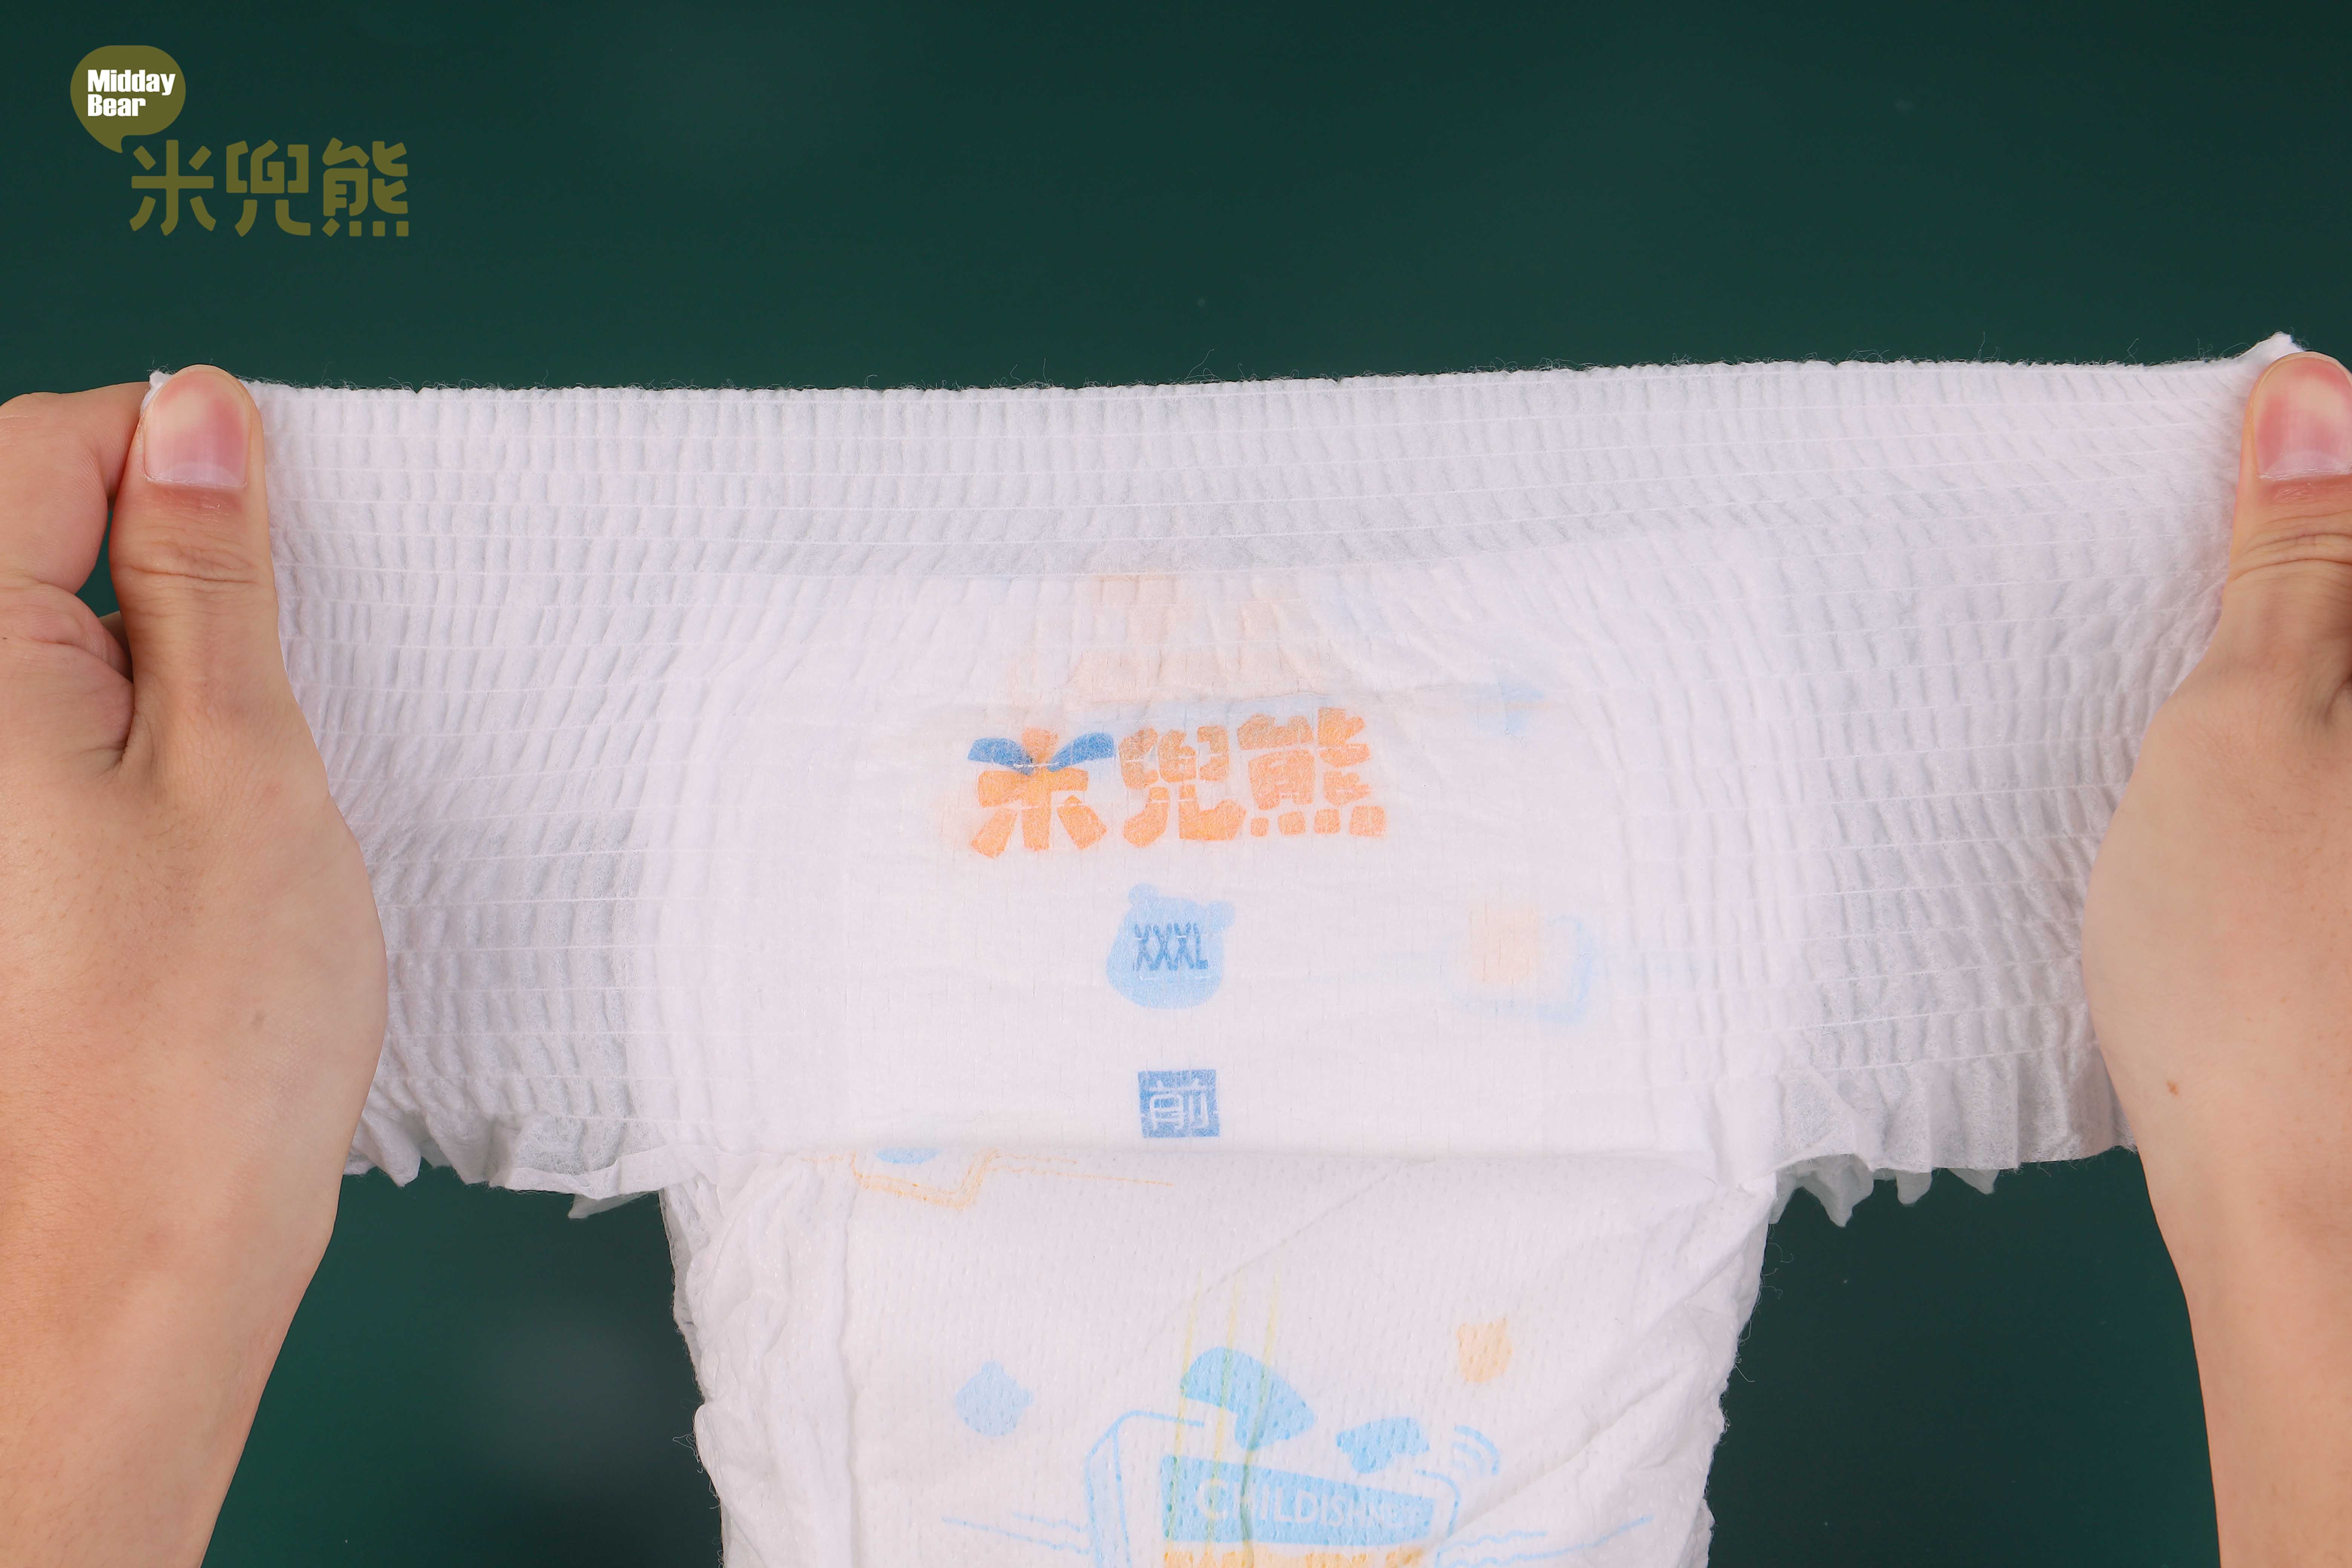 The Cheapest Economy Baby diapers to be lightweight and breathable